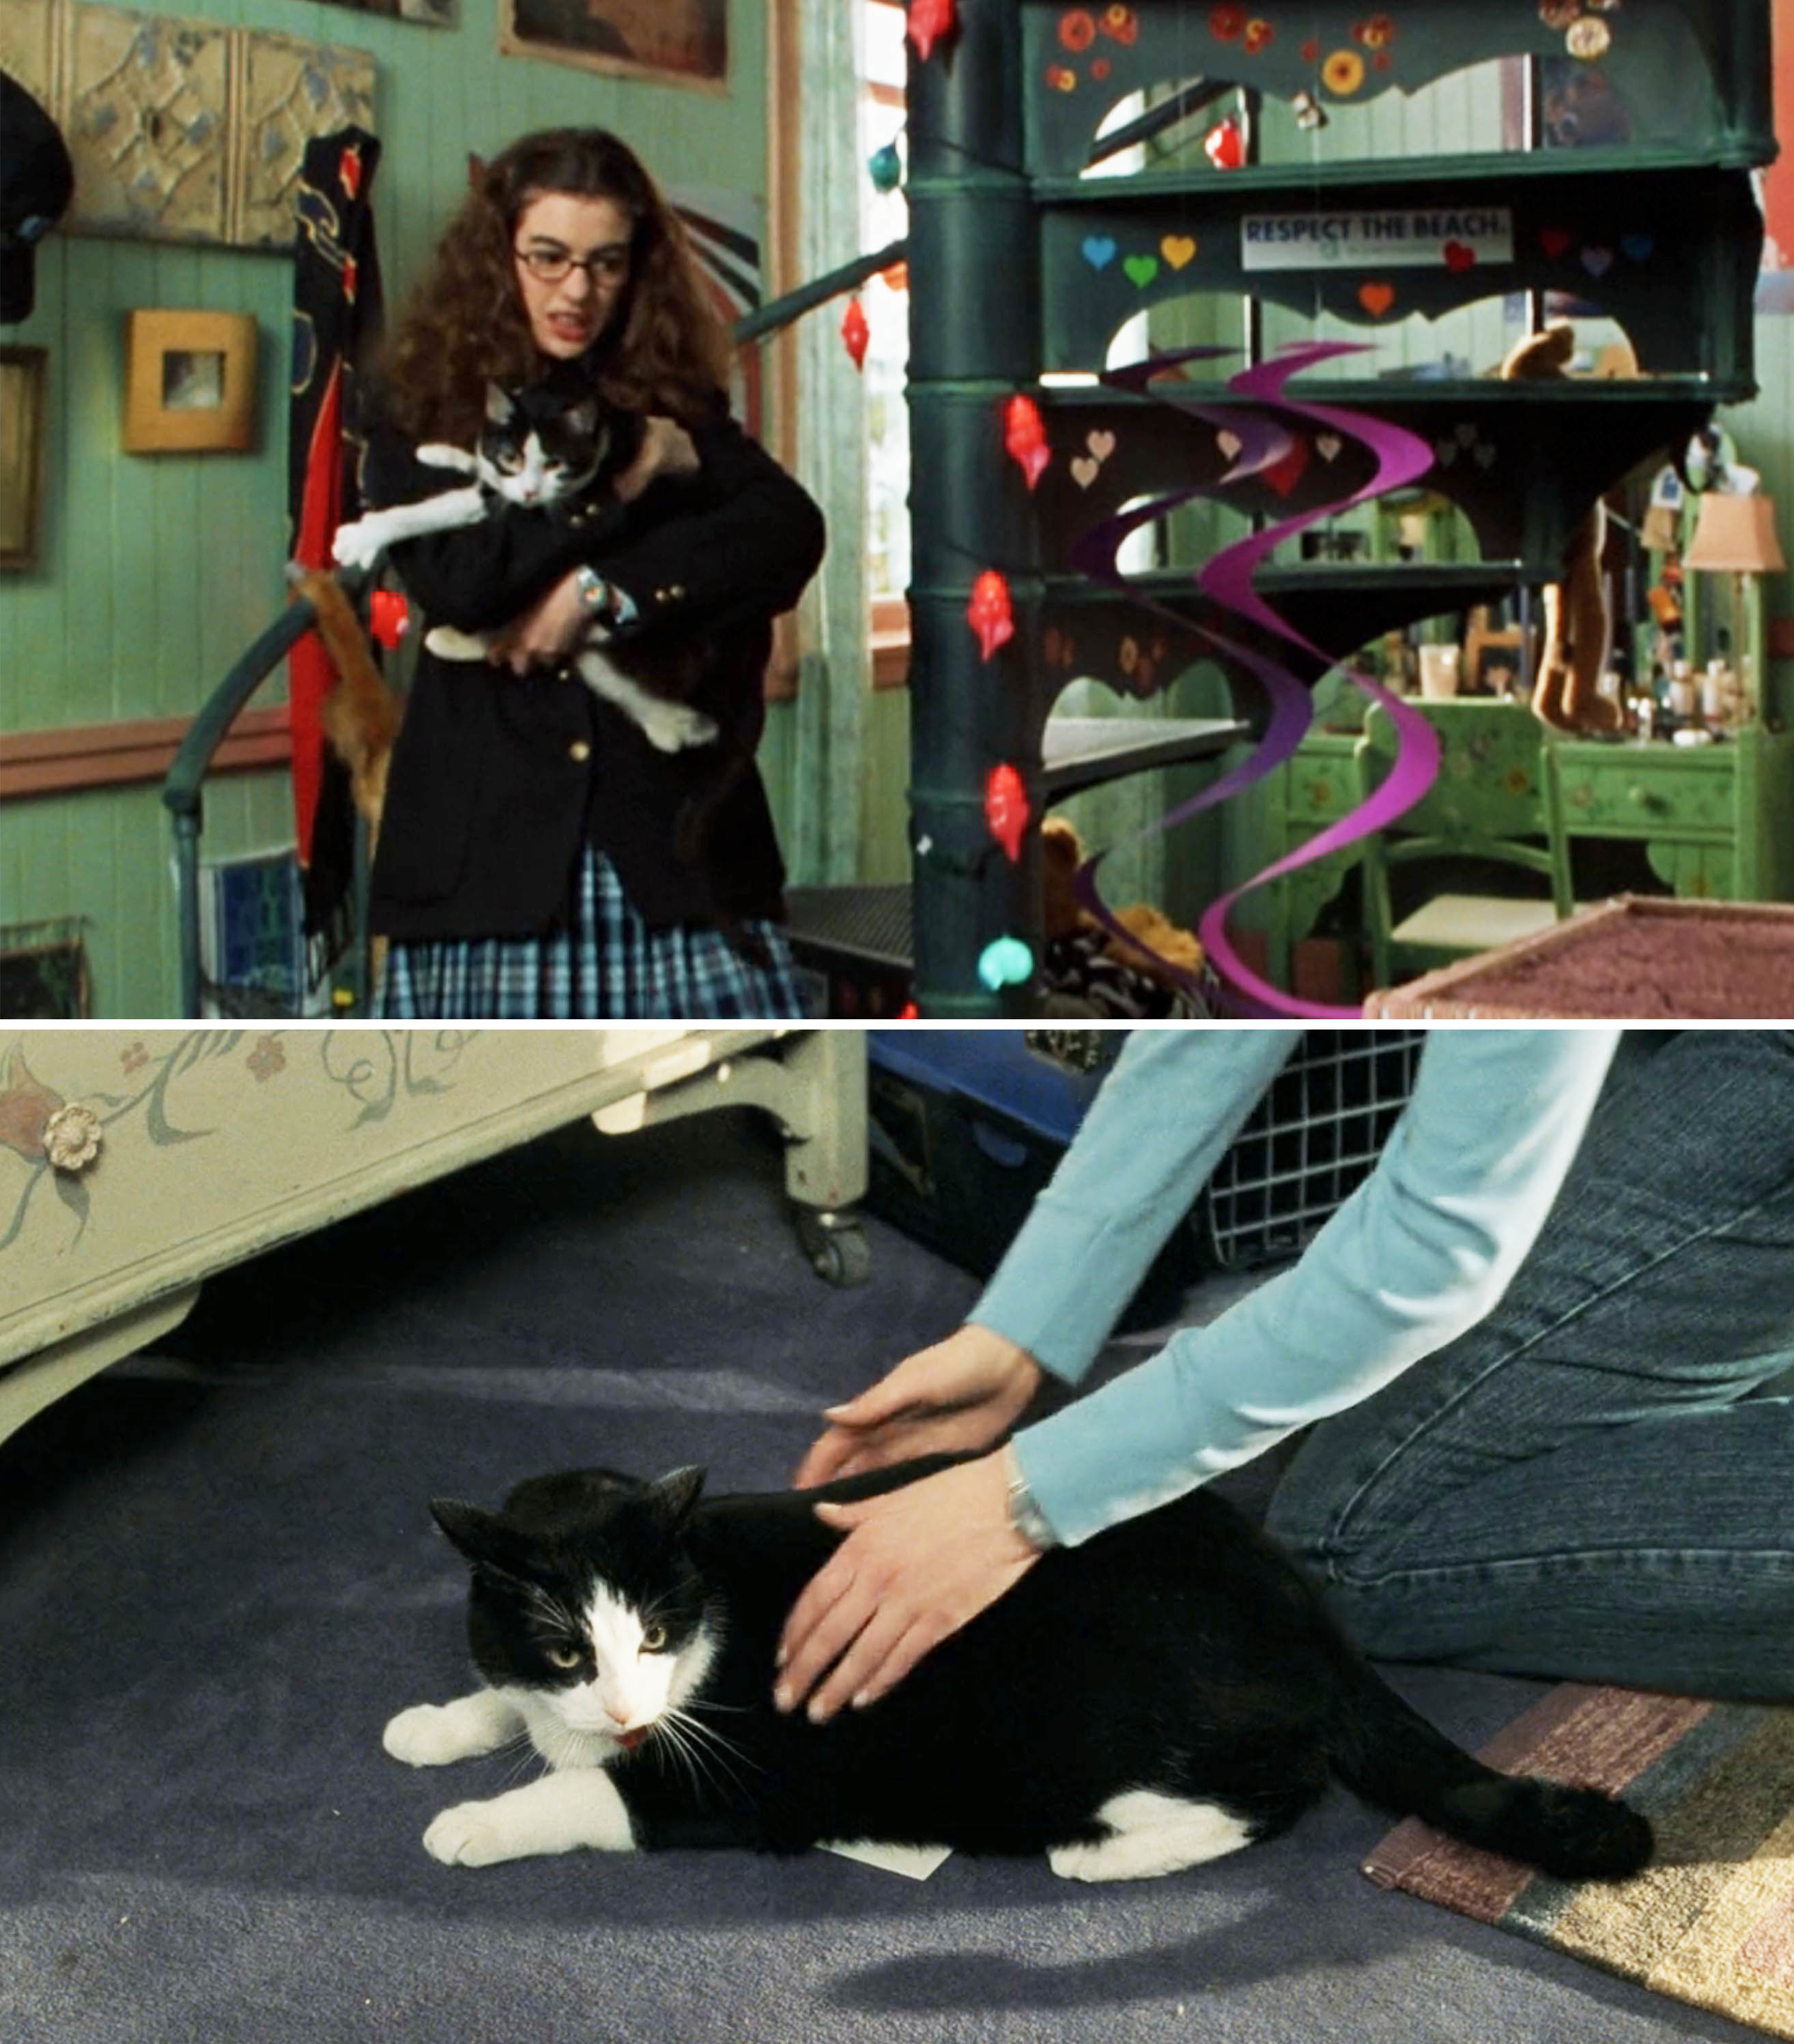 Top: Mia from The Princess Diaries holds her cat Fat Louie; bottom: A hand pets Fat Louie on a bed